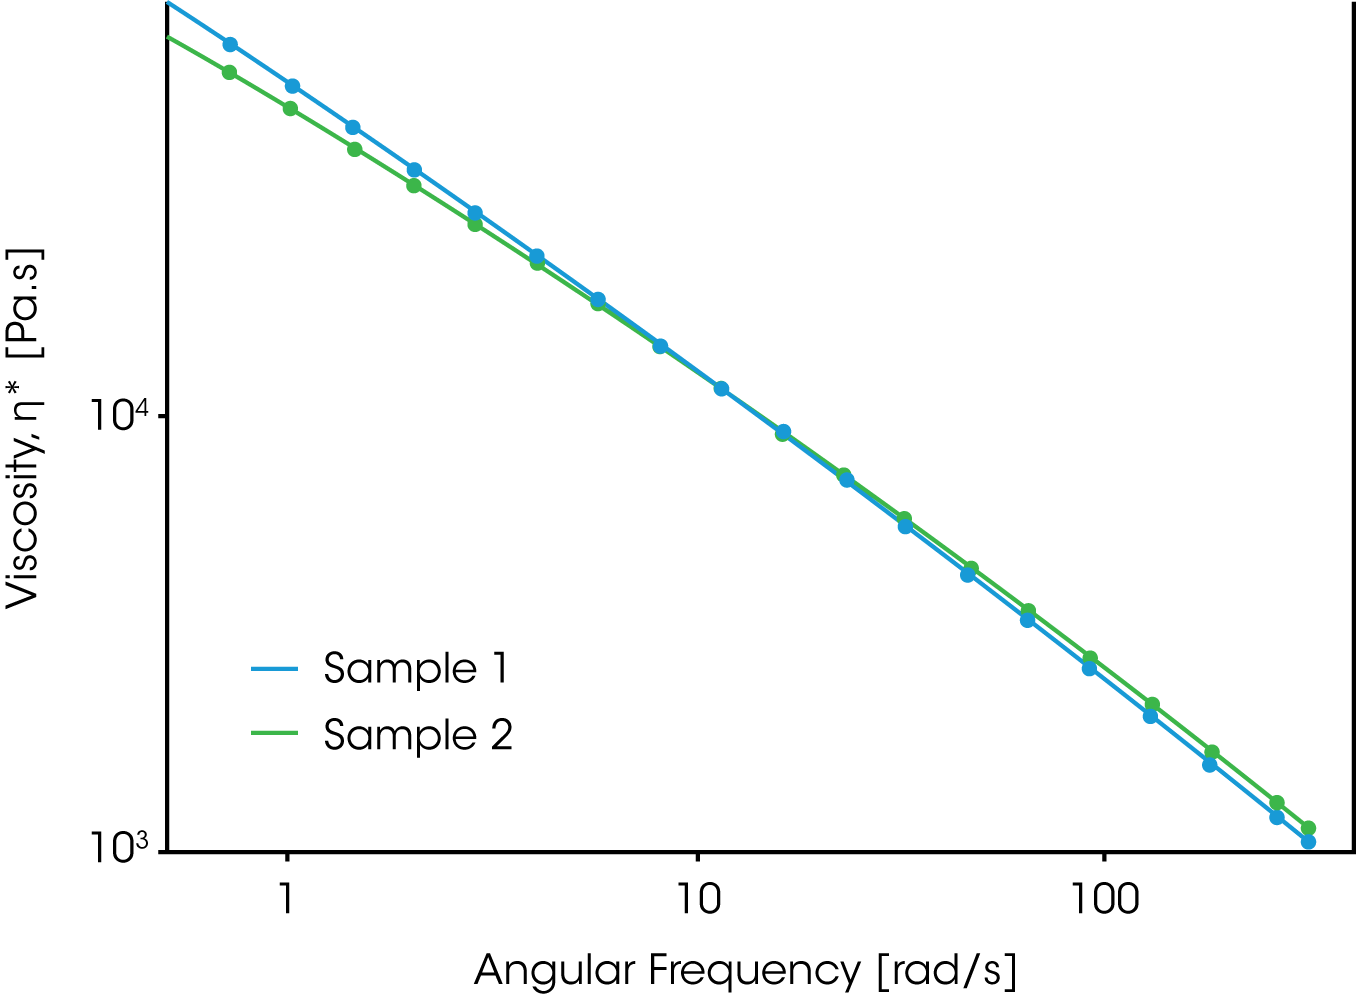 Figure 2. Data from a frequency sweep shows the complex viscosity as a function of angular frequency for sample 1 and 2. The frequency spectra show similar behavior in processability between both samples, especially in the high shear rate range which correlates with flow behavior in an extrusion process.